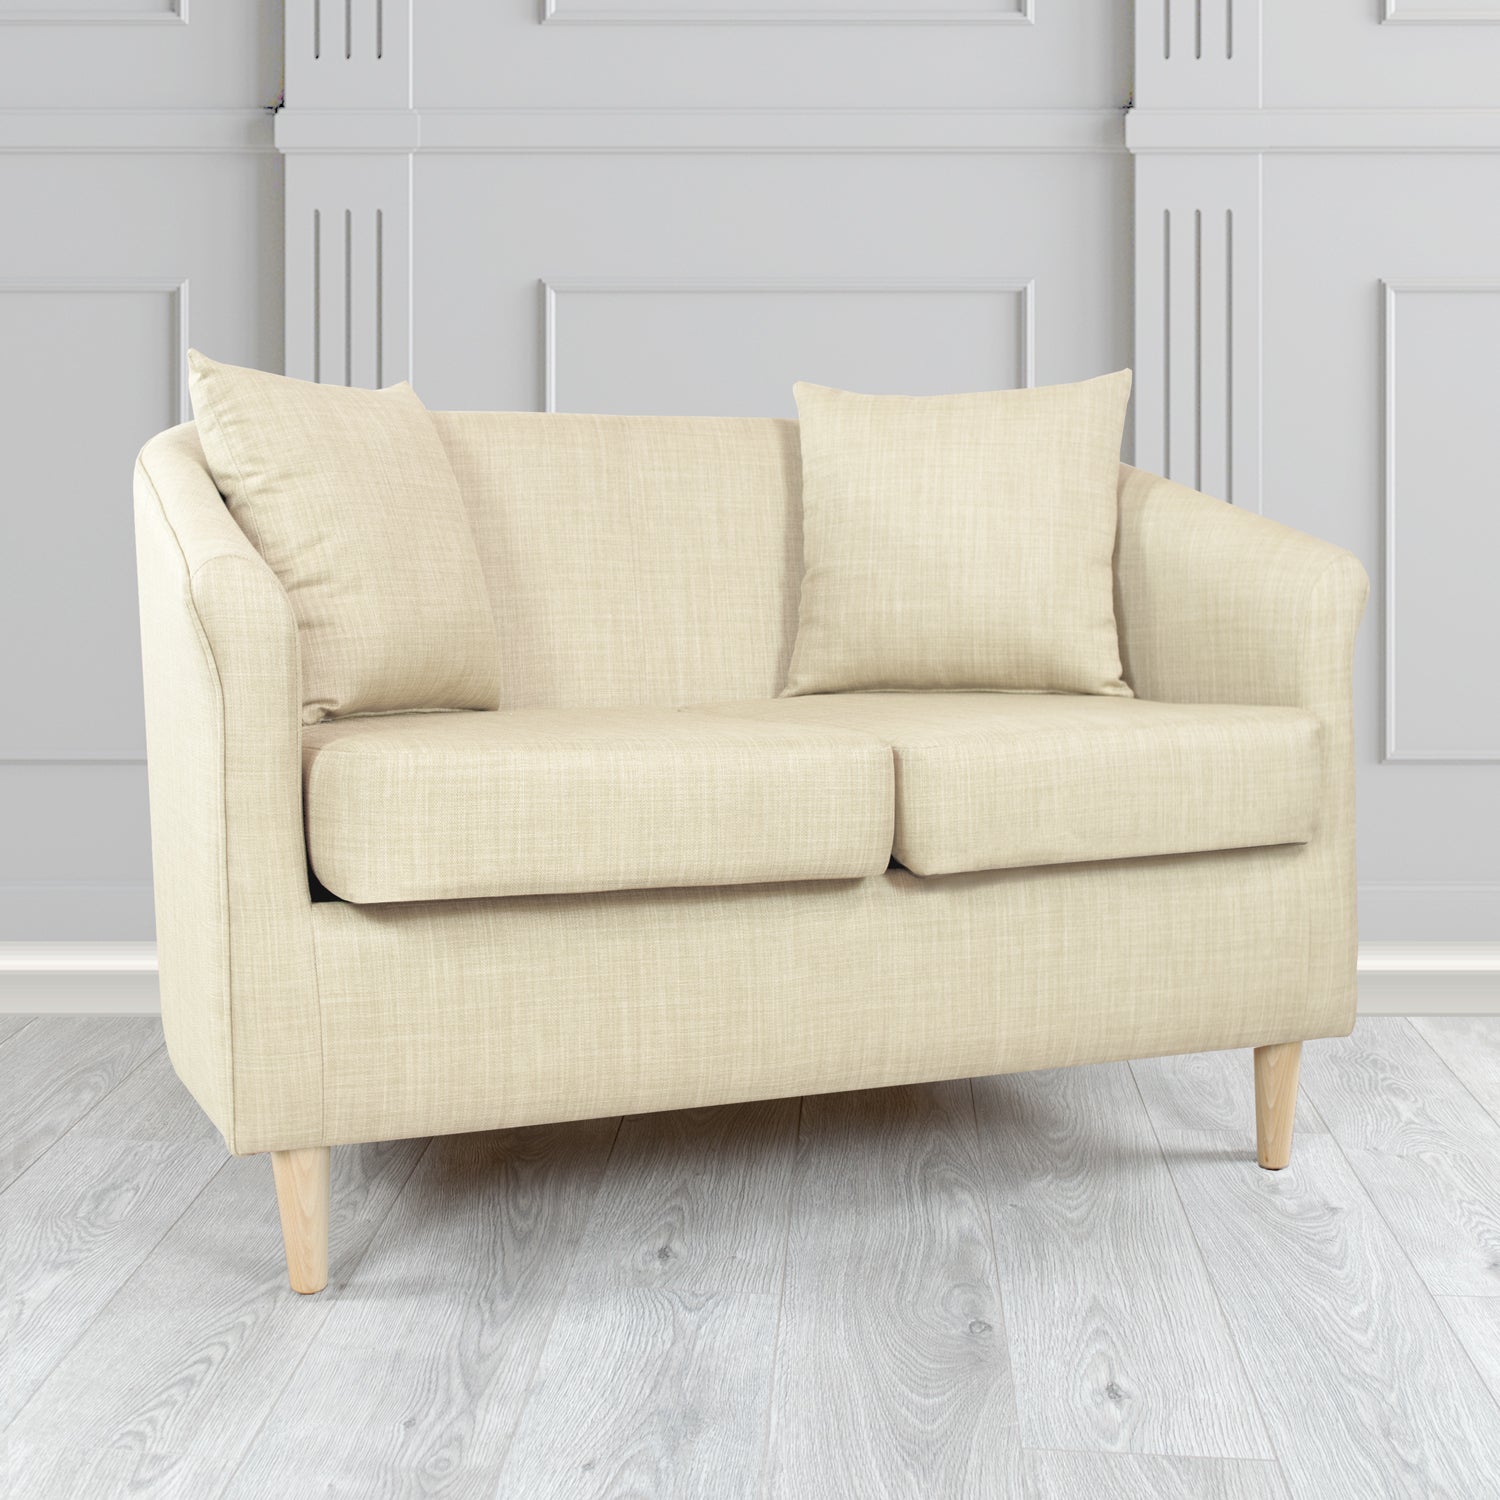 St Tropez Charles Cream Plain Linen Fabric 2 Seater Tub Sofa with Scatter Cushions - The Tub Chair Shop